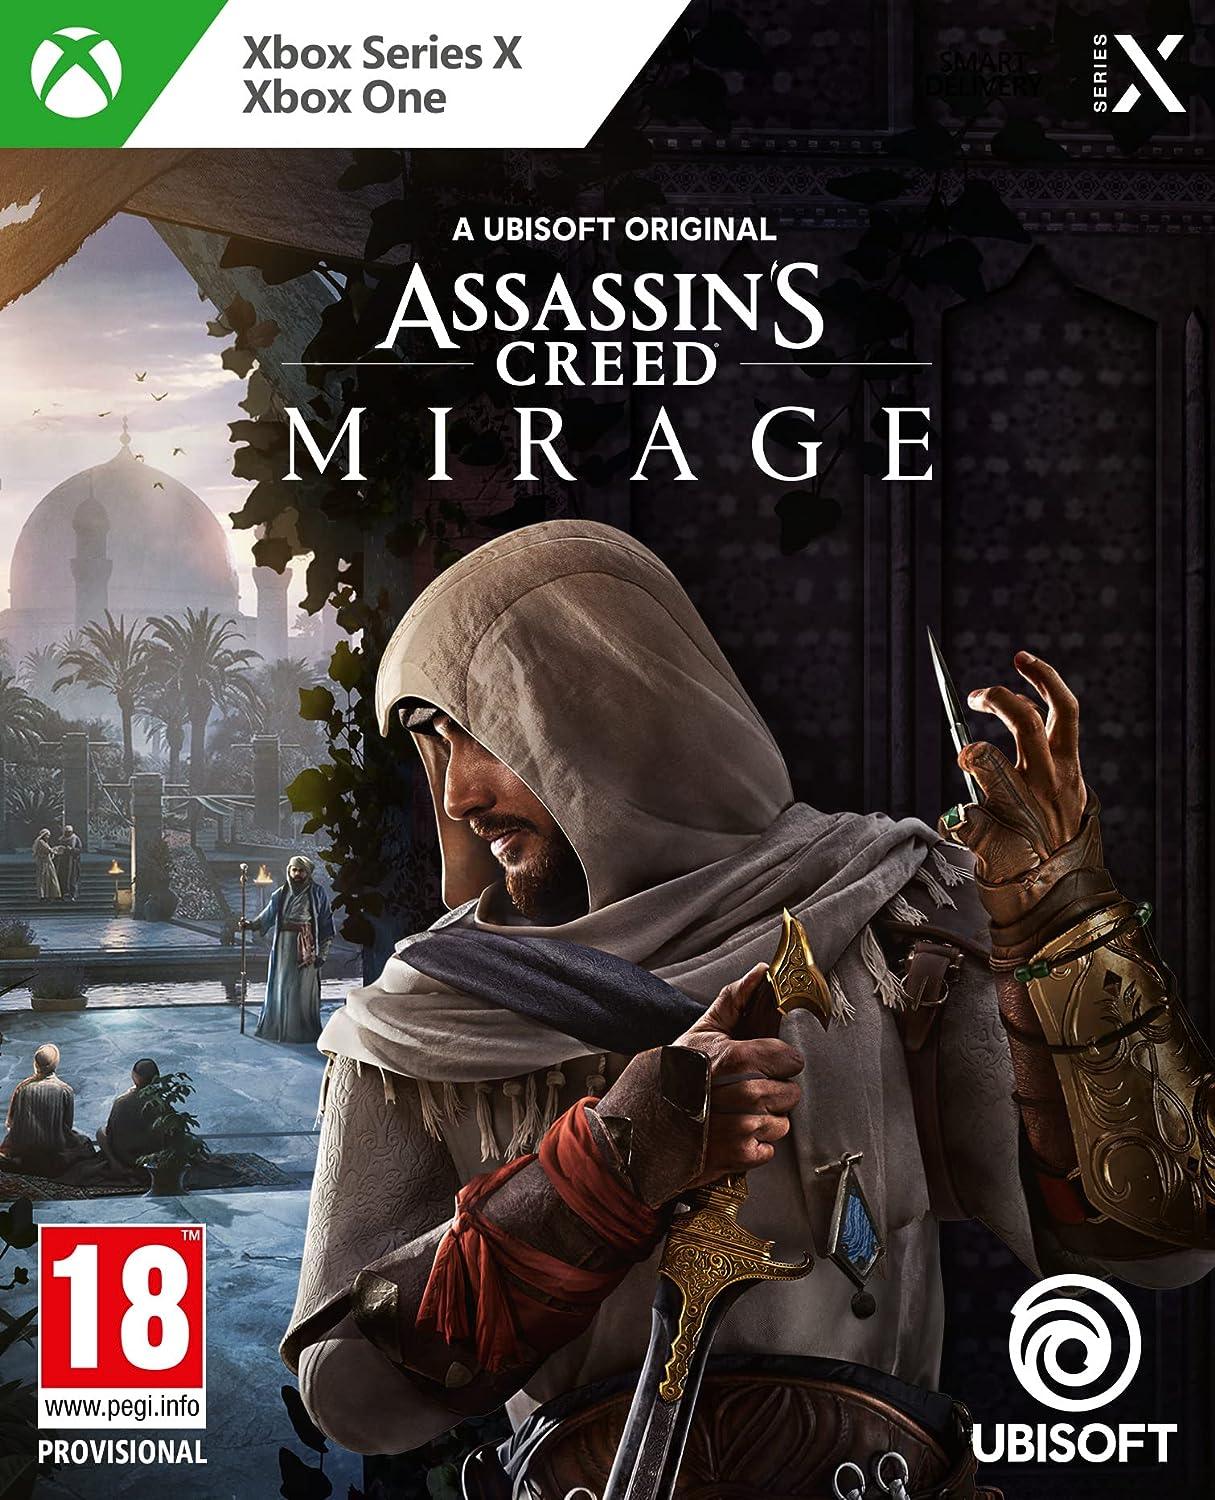 Assassin's Creed Mirage (Xbox Series X) (Xbox One) - GameStore.mt | Powered by Flutisat